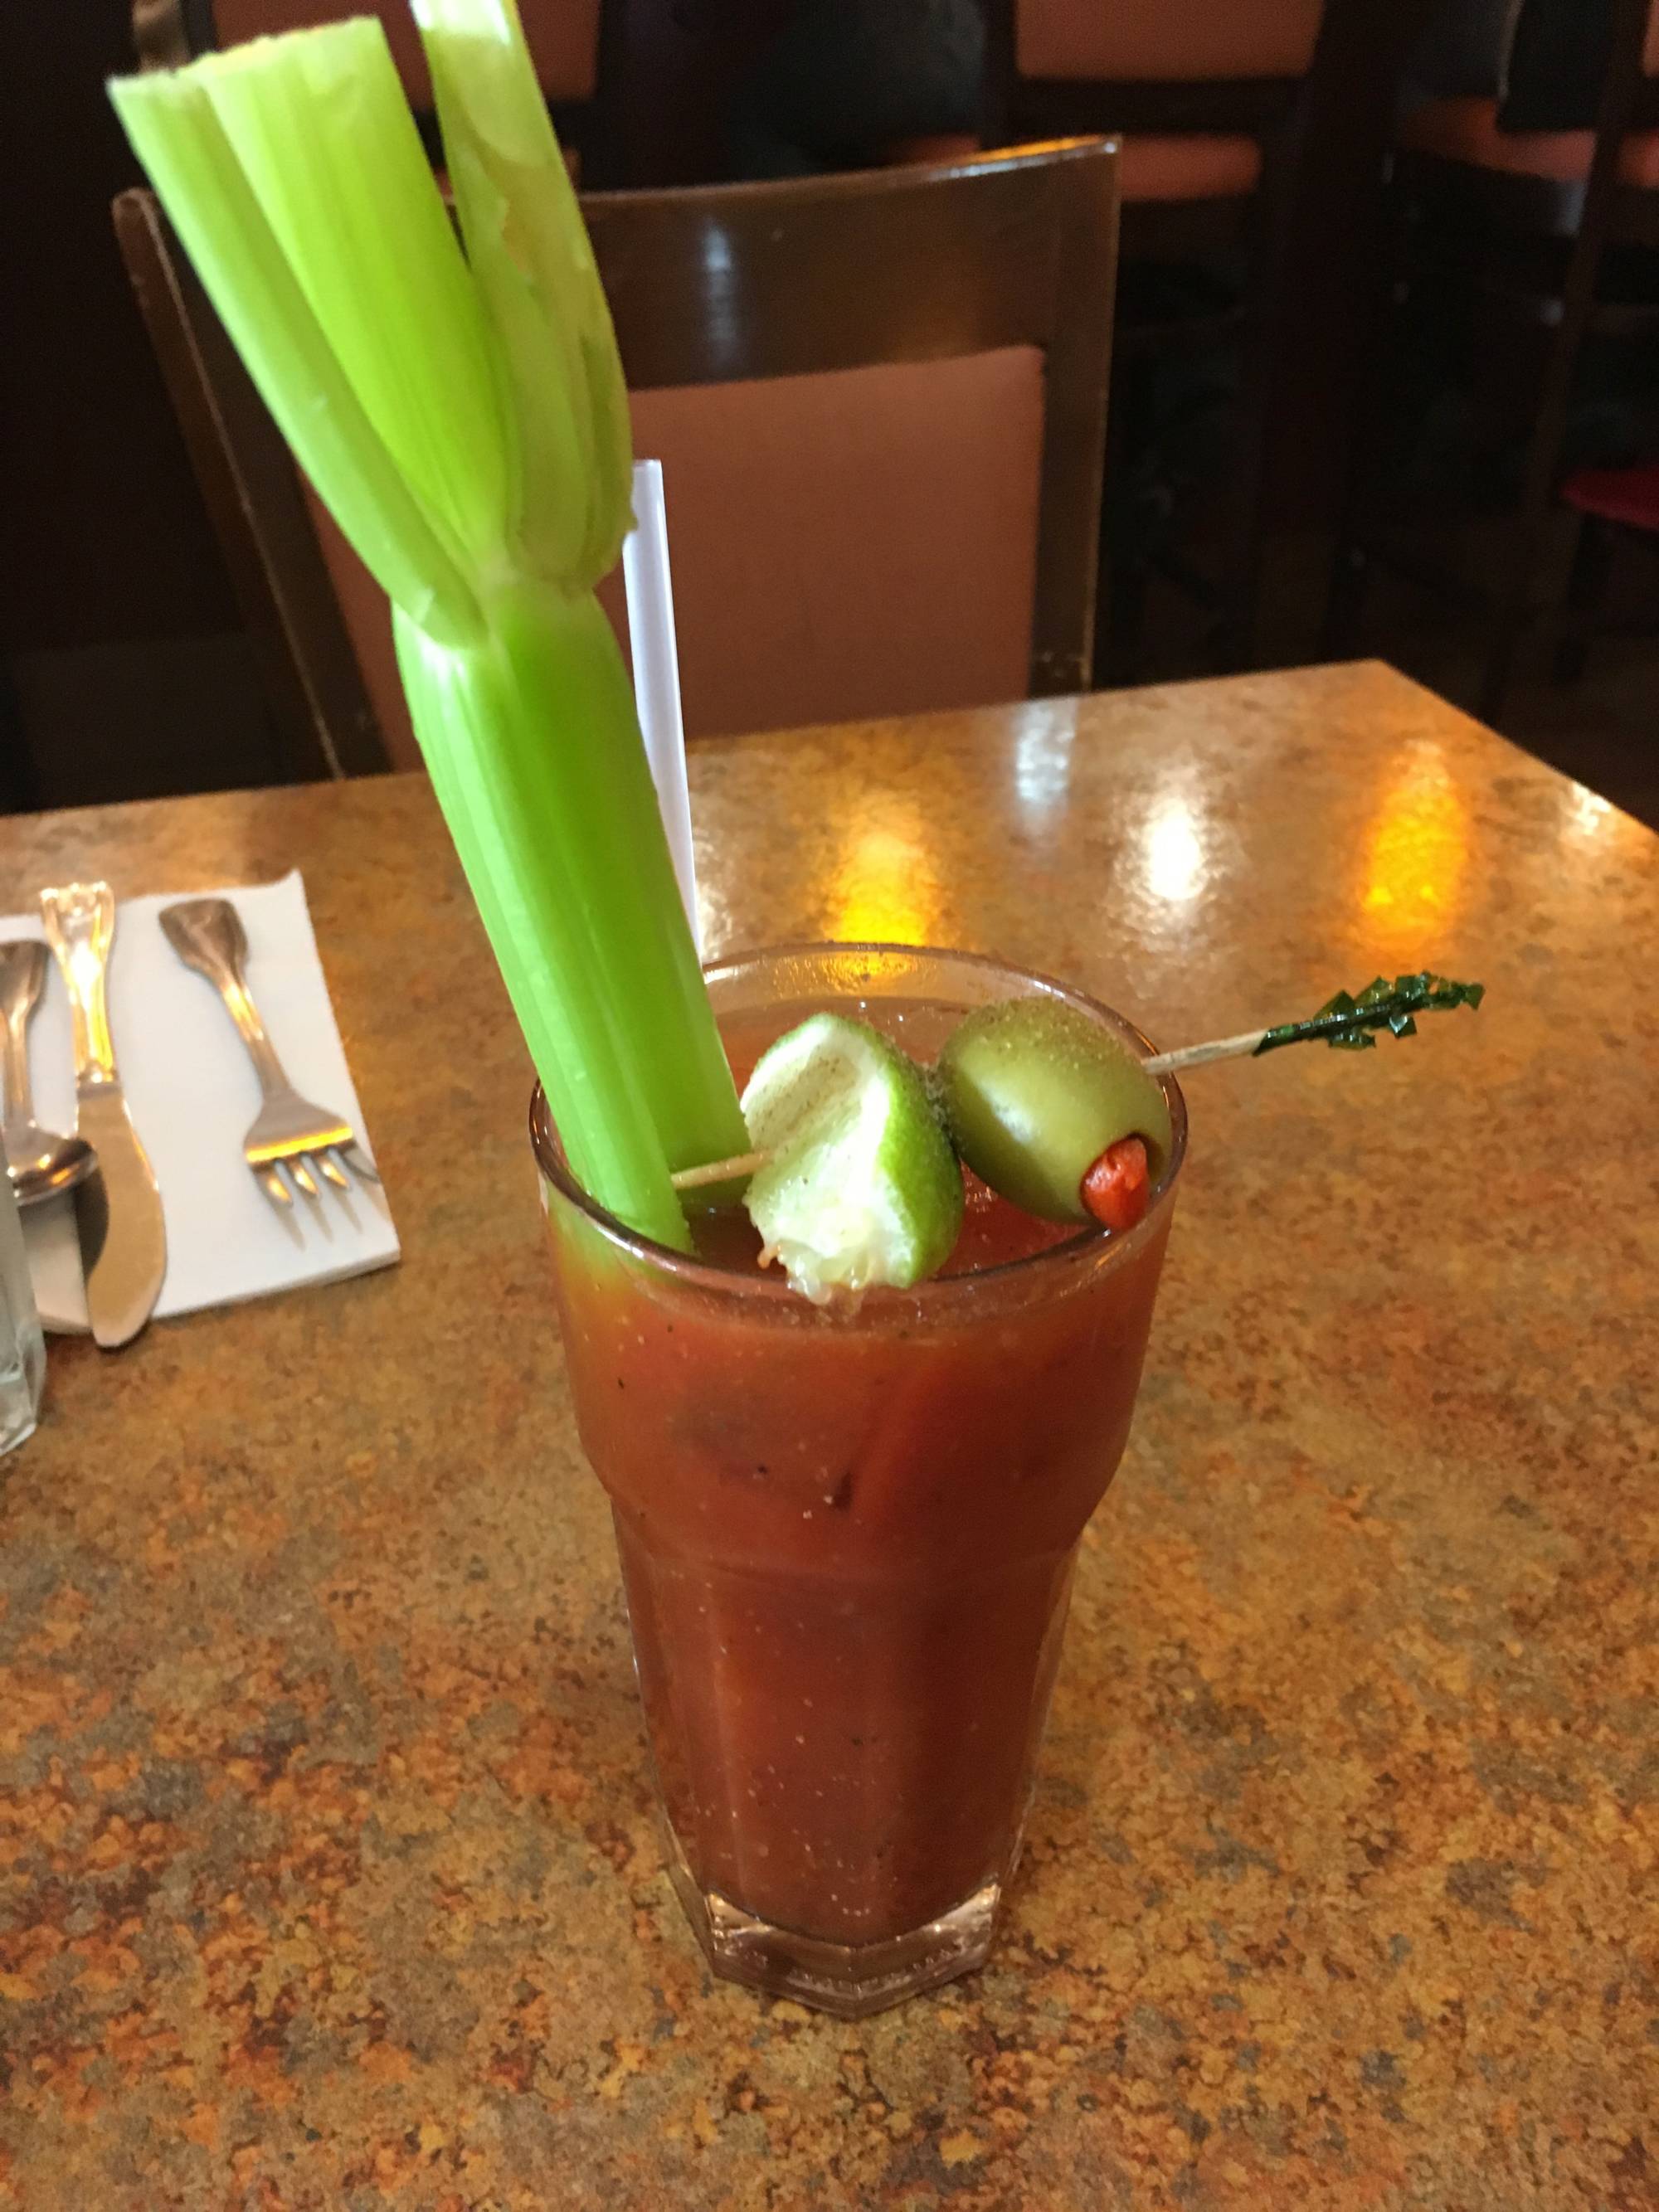 A Bloody Mary at Bill’s Cafe.